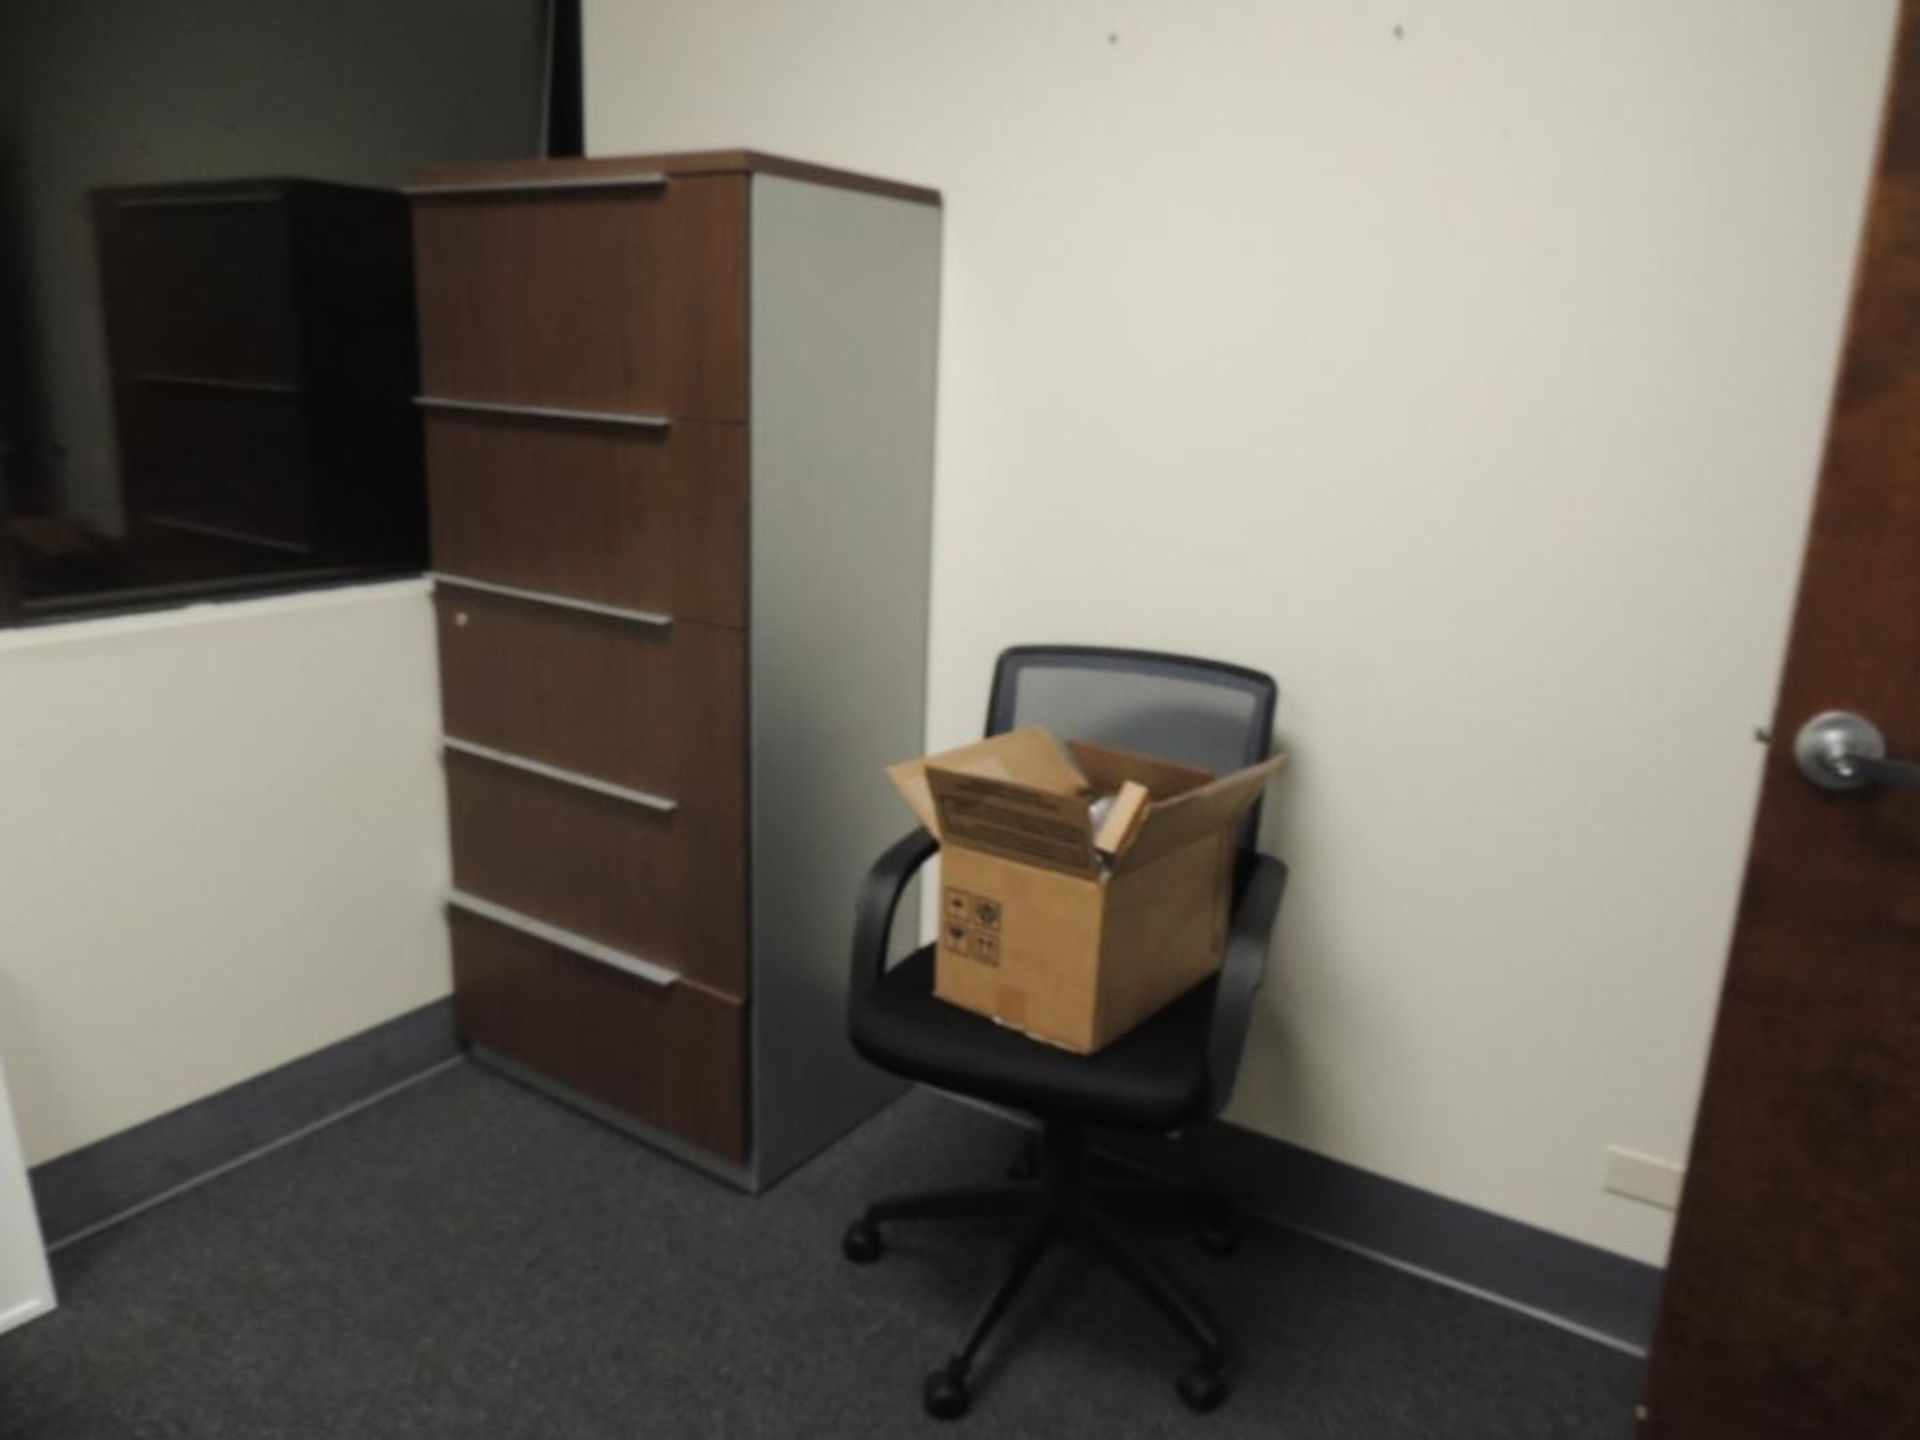 LOT: Contents of 1st Office including Desk with (5) Drawers & Adjustable Shelves, 5-Drawer File Cabi